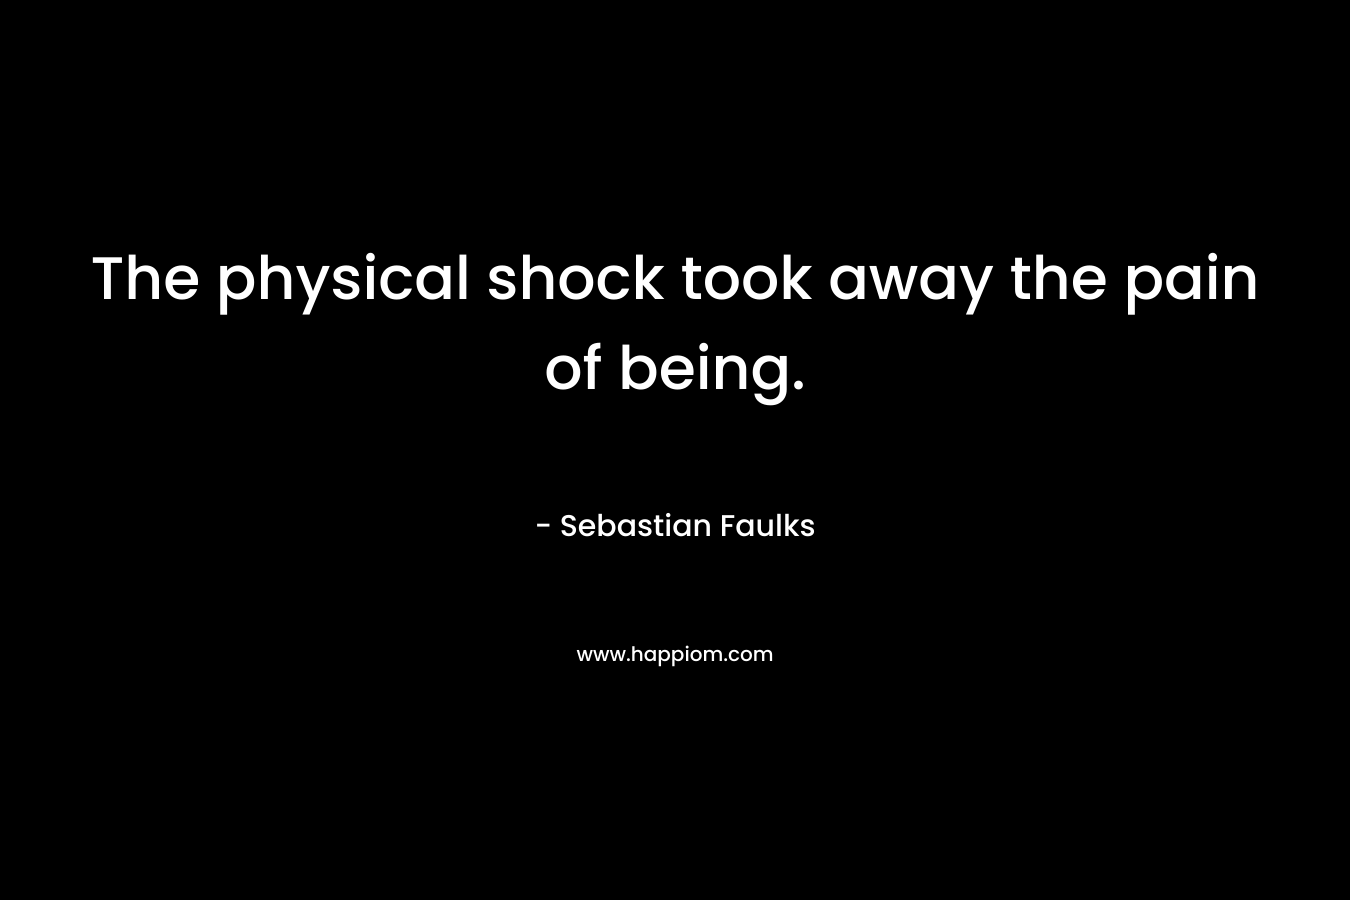 The physical shock took away the pain of being.